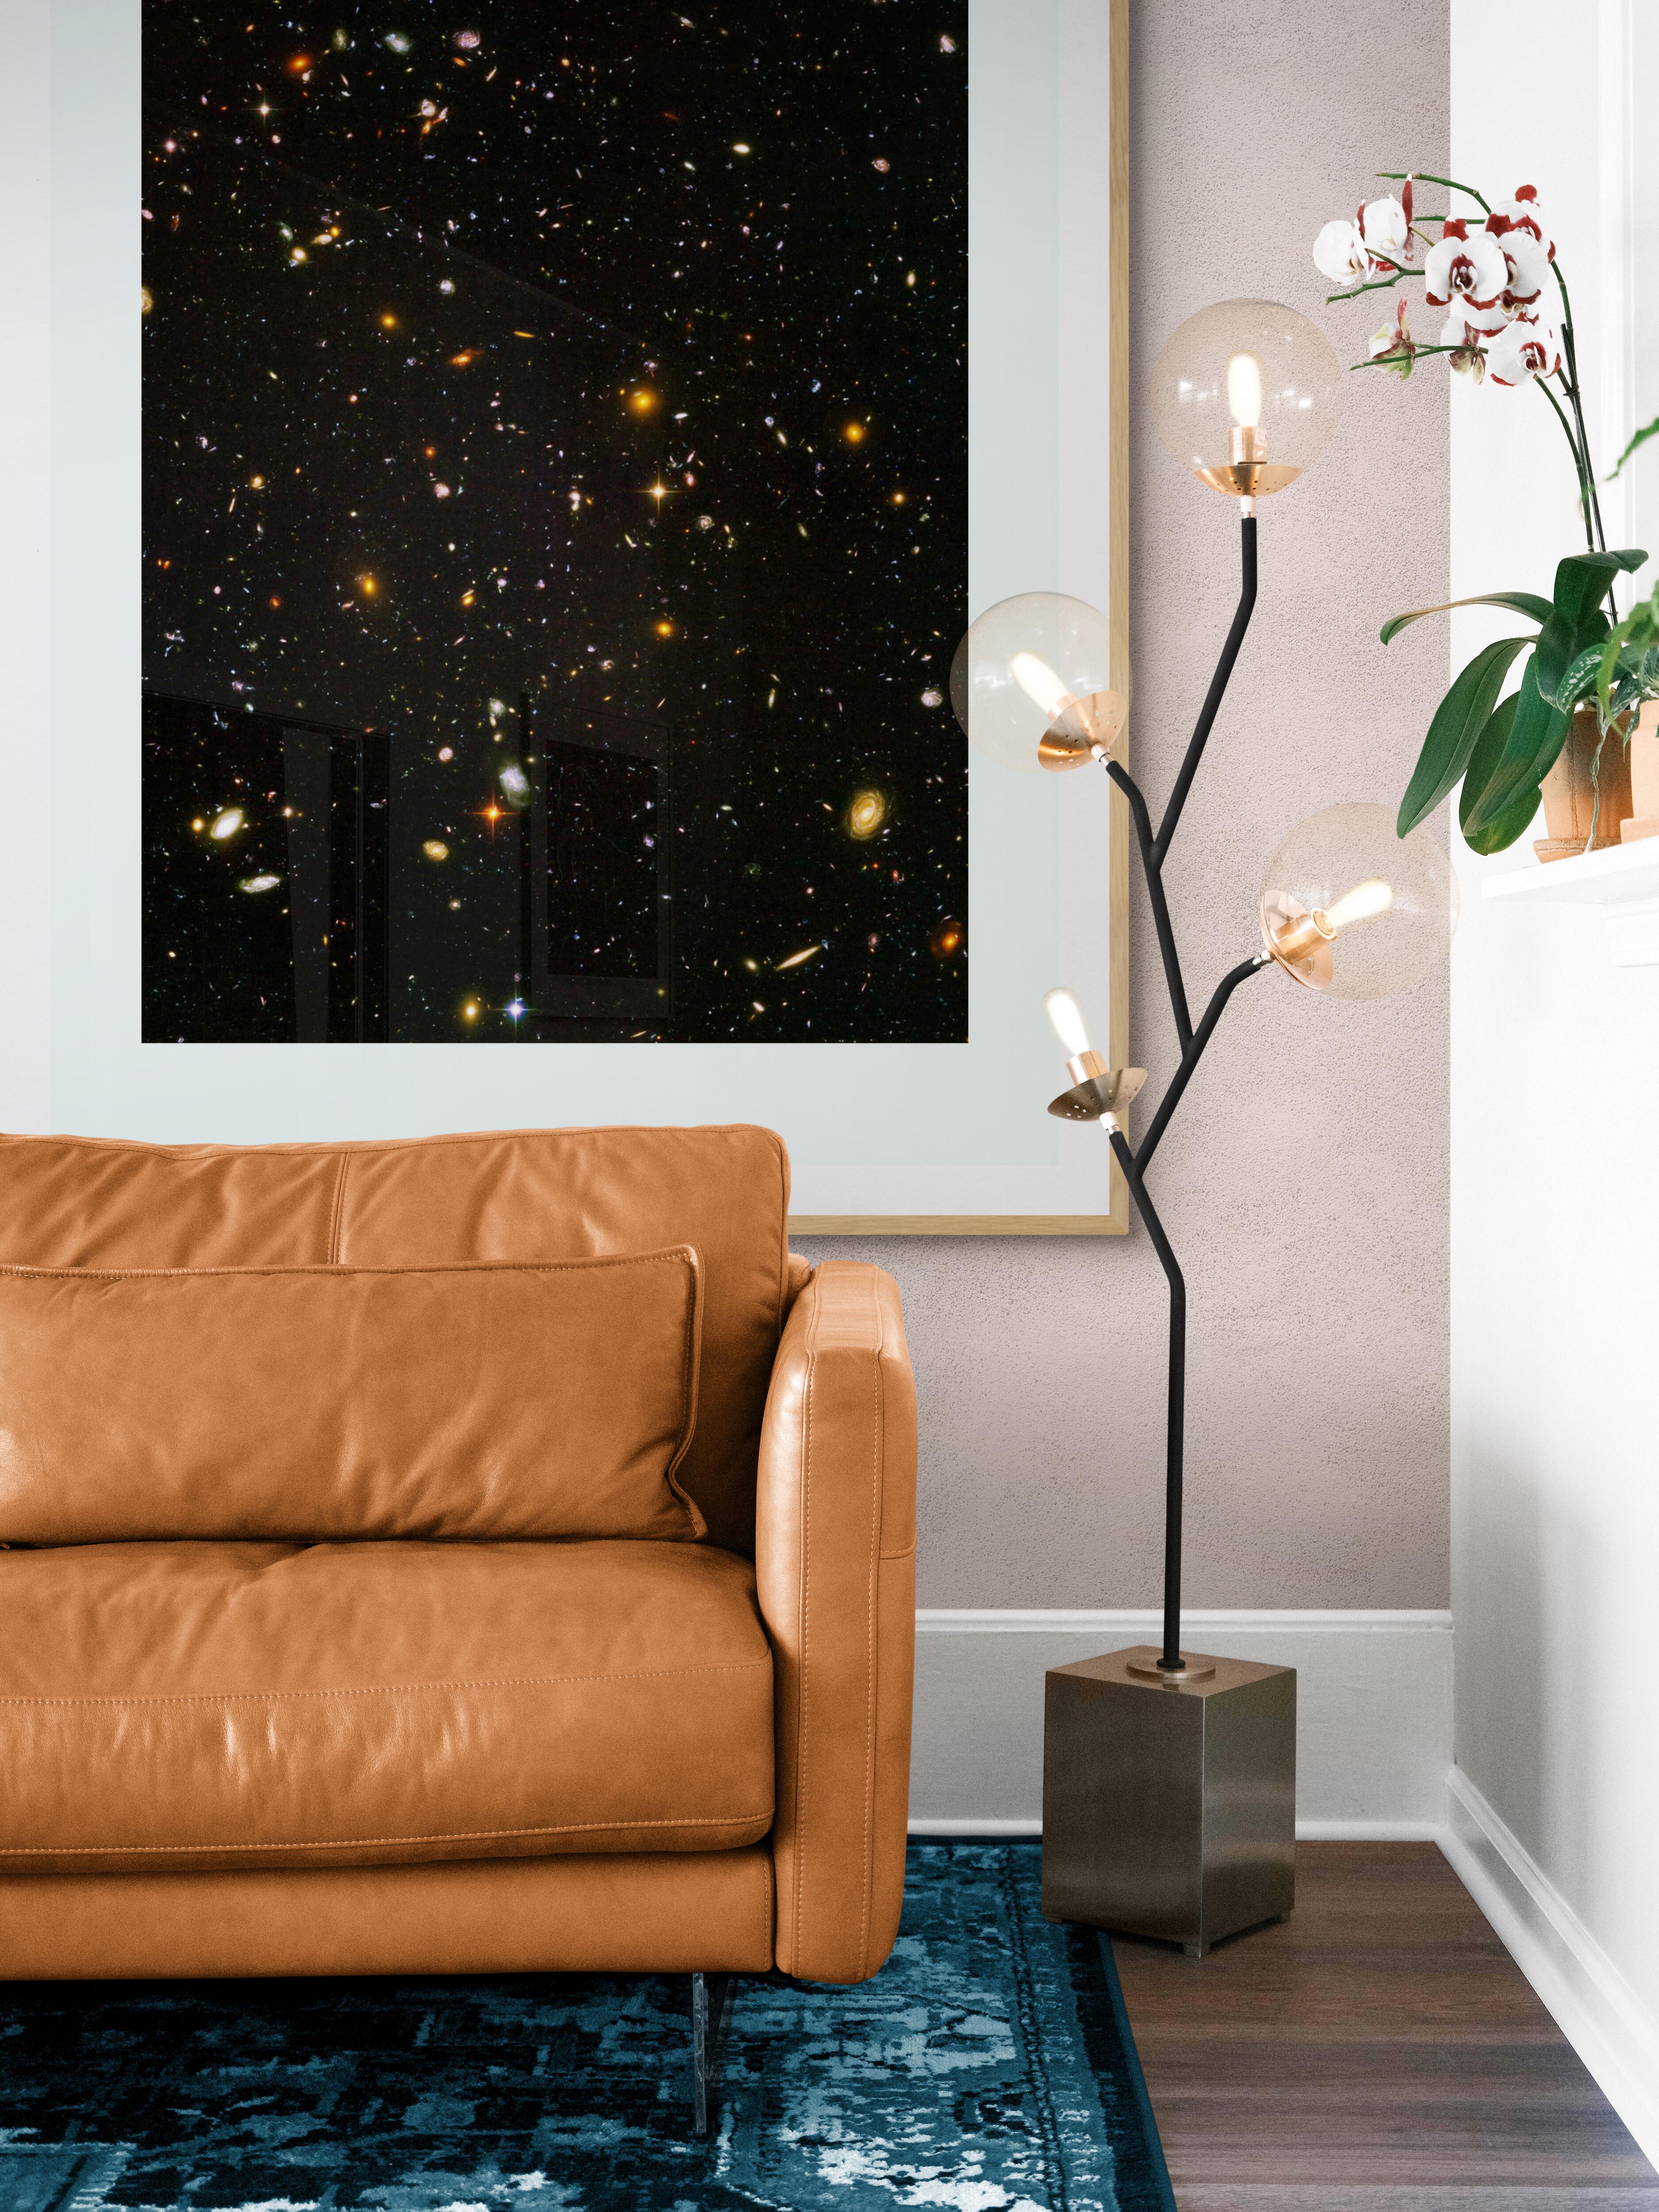  Original museum grade exhibition prints on acid-free poster paper.
This image can be hung horizontal or verticle.

Embedded in this Hubble Space Telescope image of nearby and distant galaxies are 18 young galaxies or galactic building blocks, each